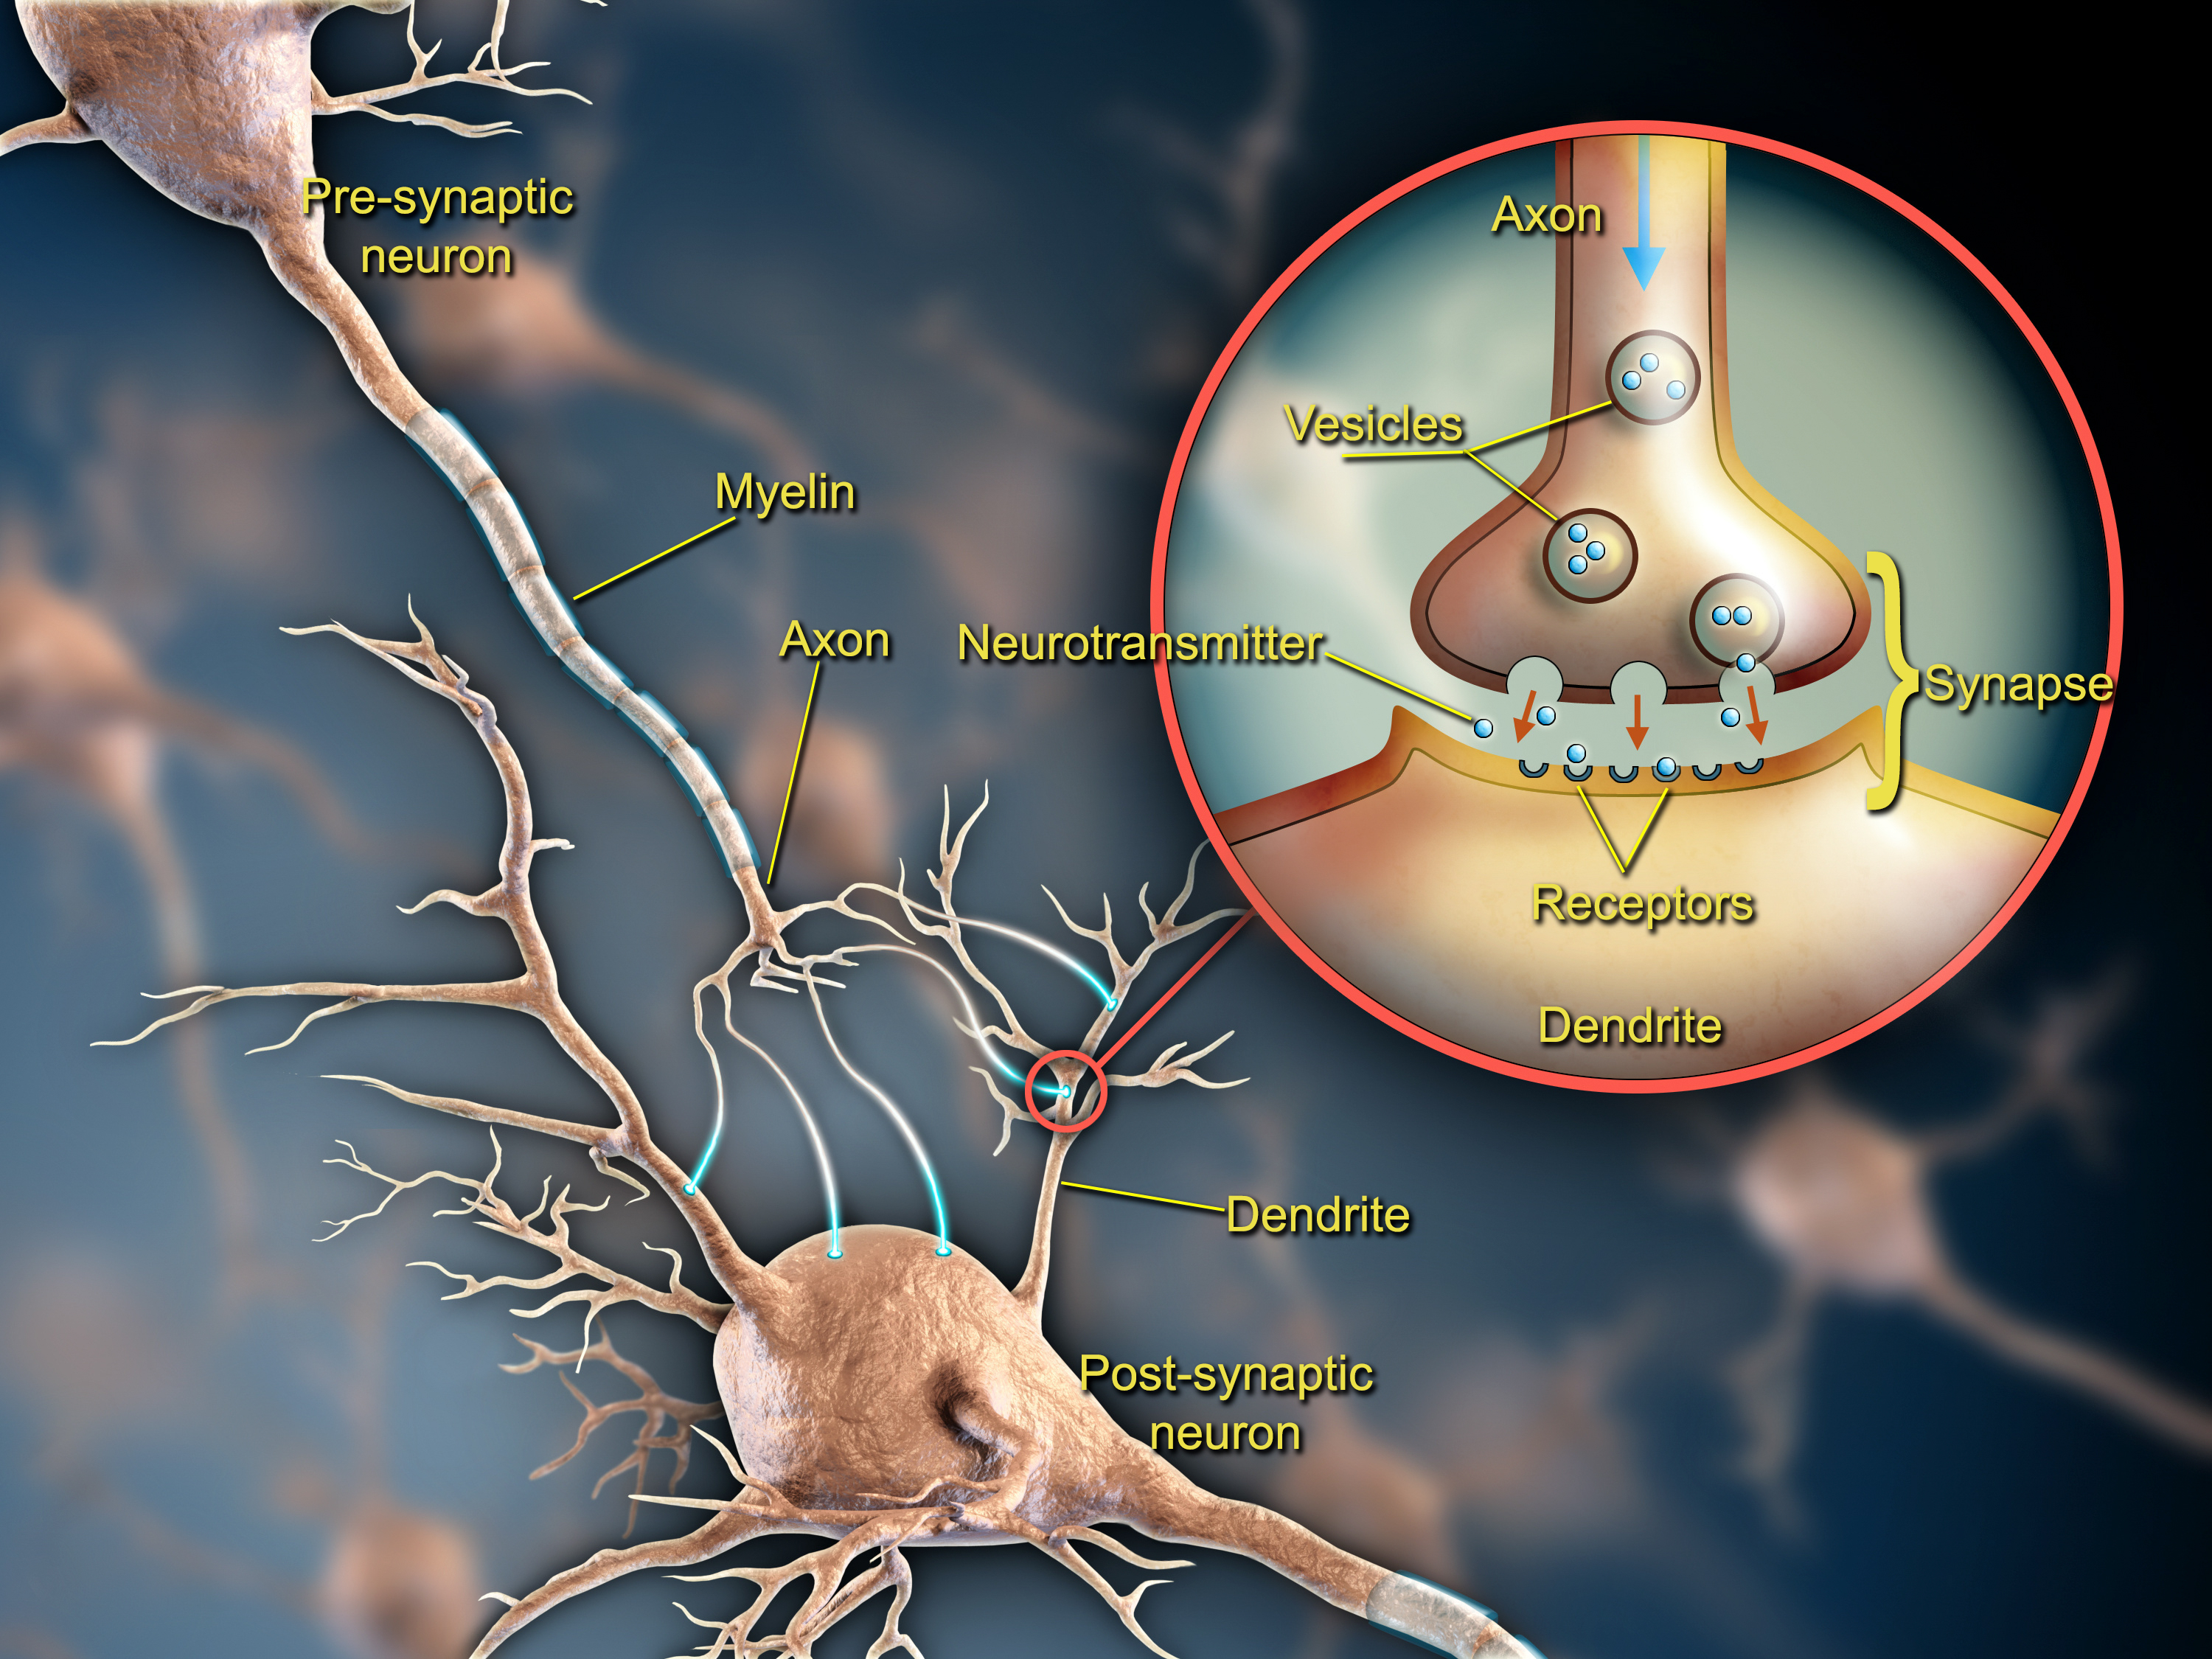 An illustratio shows one neuron branching out to connect to another. In a cutaway it zooms in on the details of the connection they make